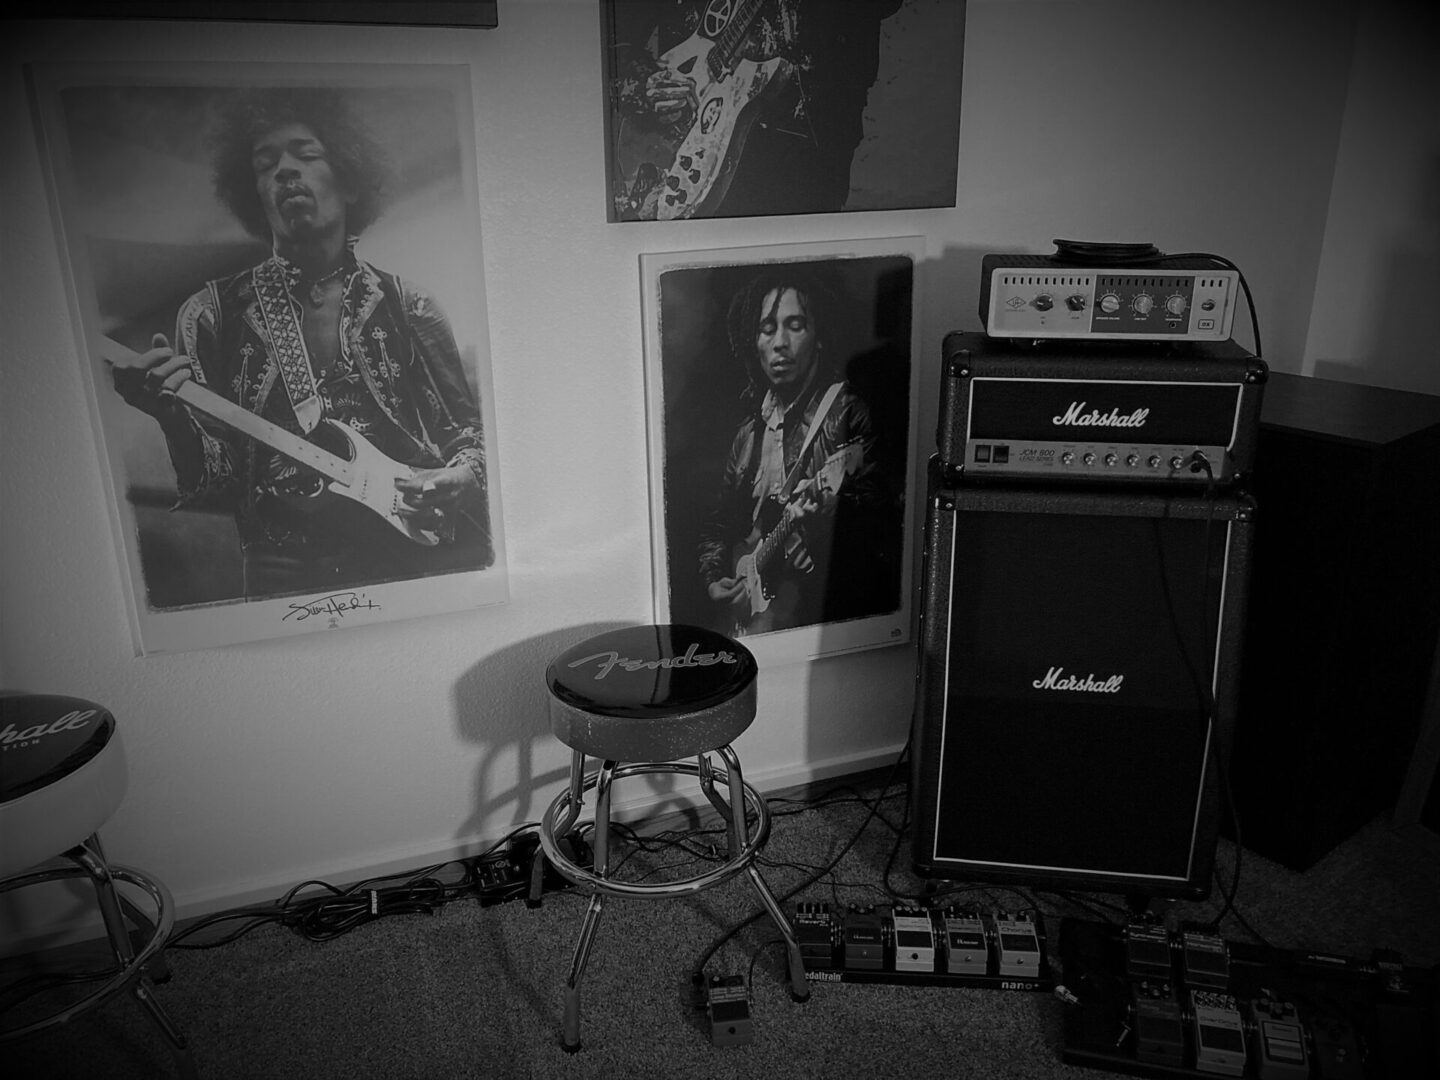 wall of posters of famous guitarists next to amps